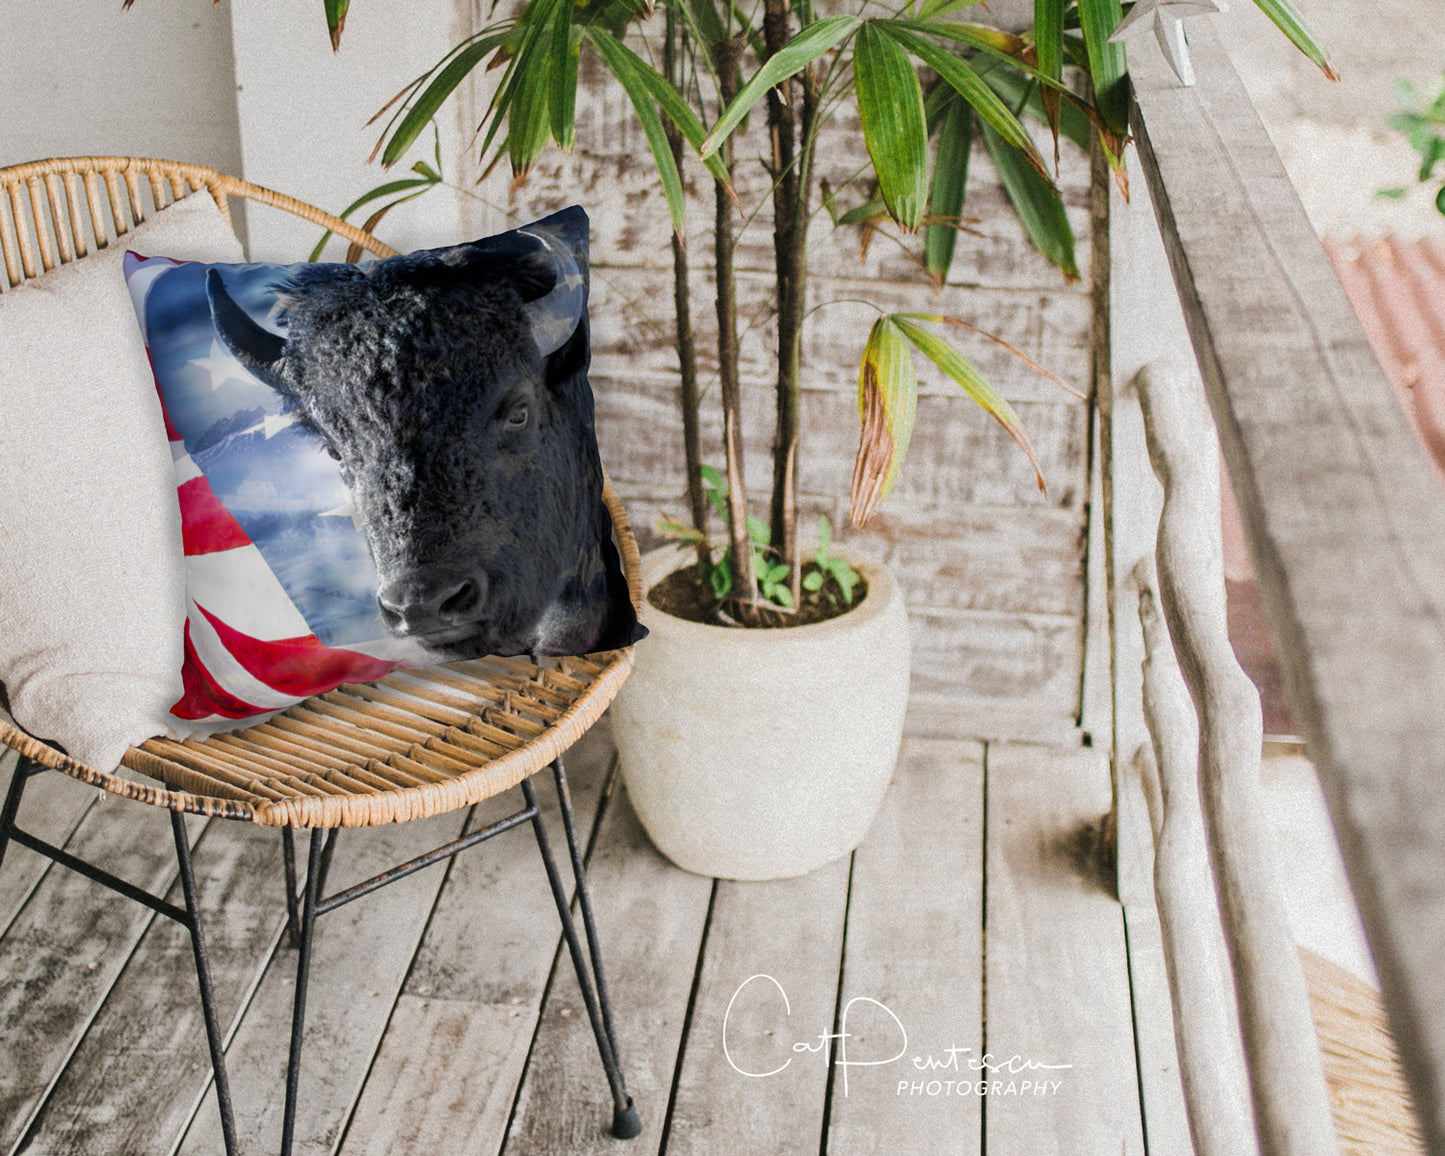 POWERED BY FREEDOM ACCENT PILLOW COVER